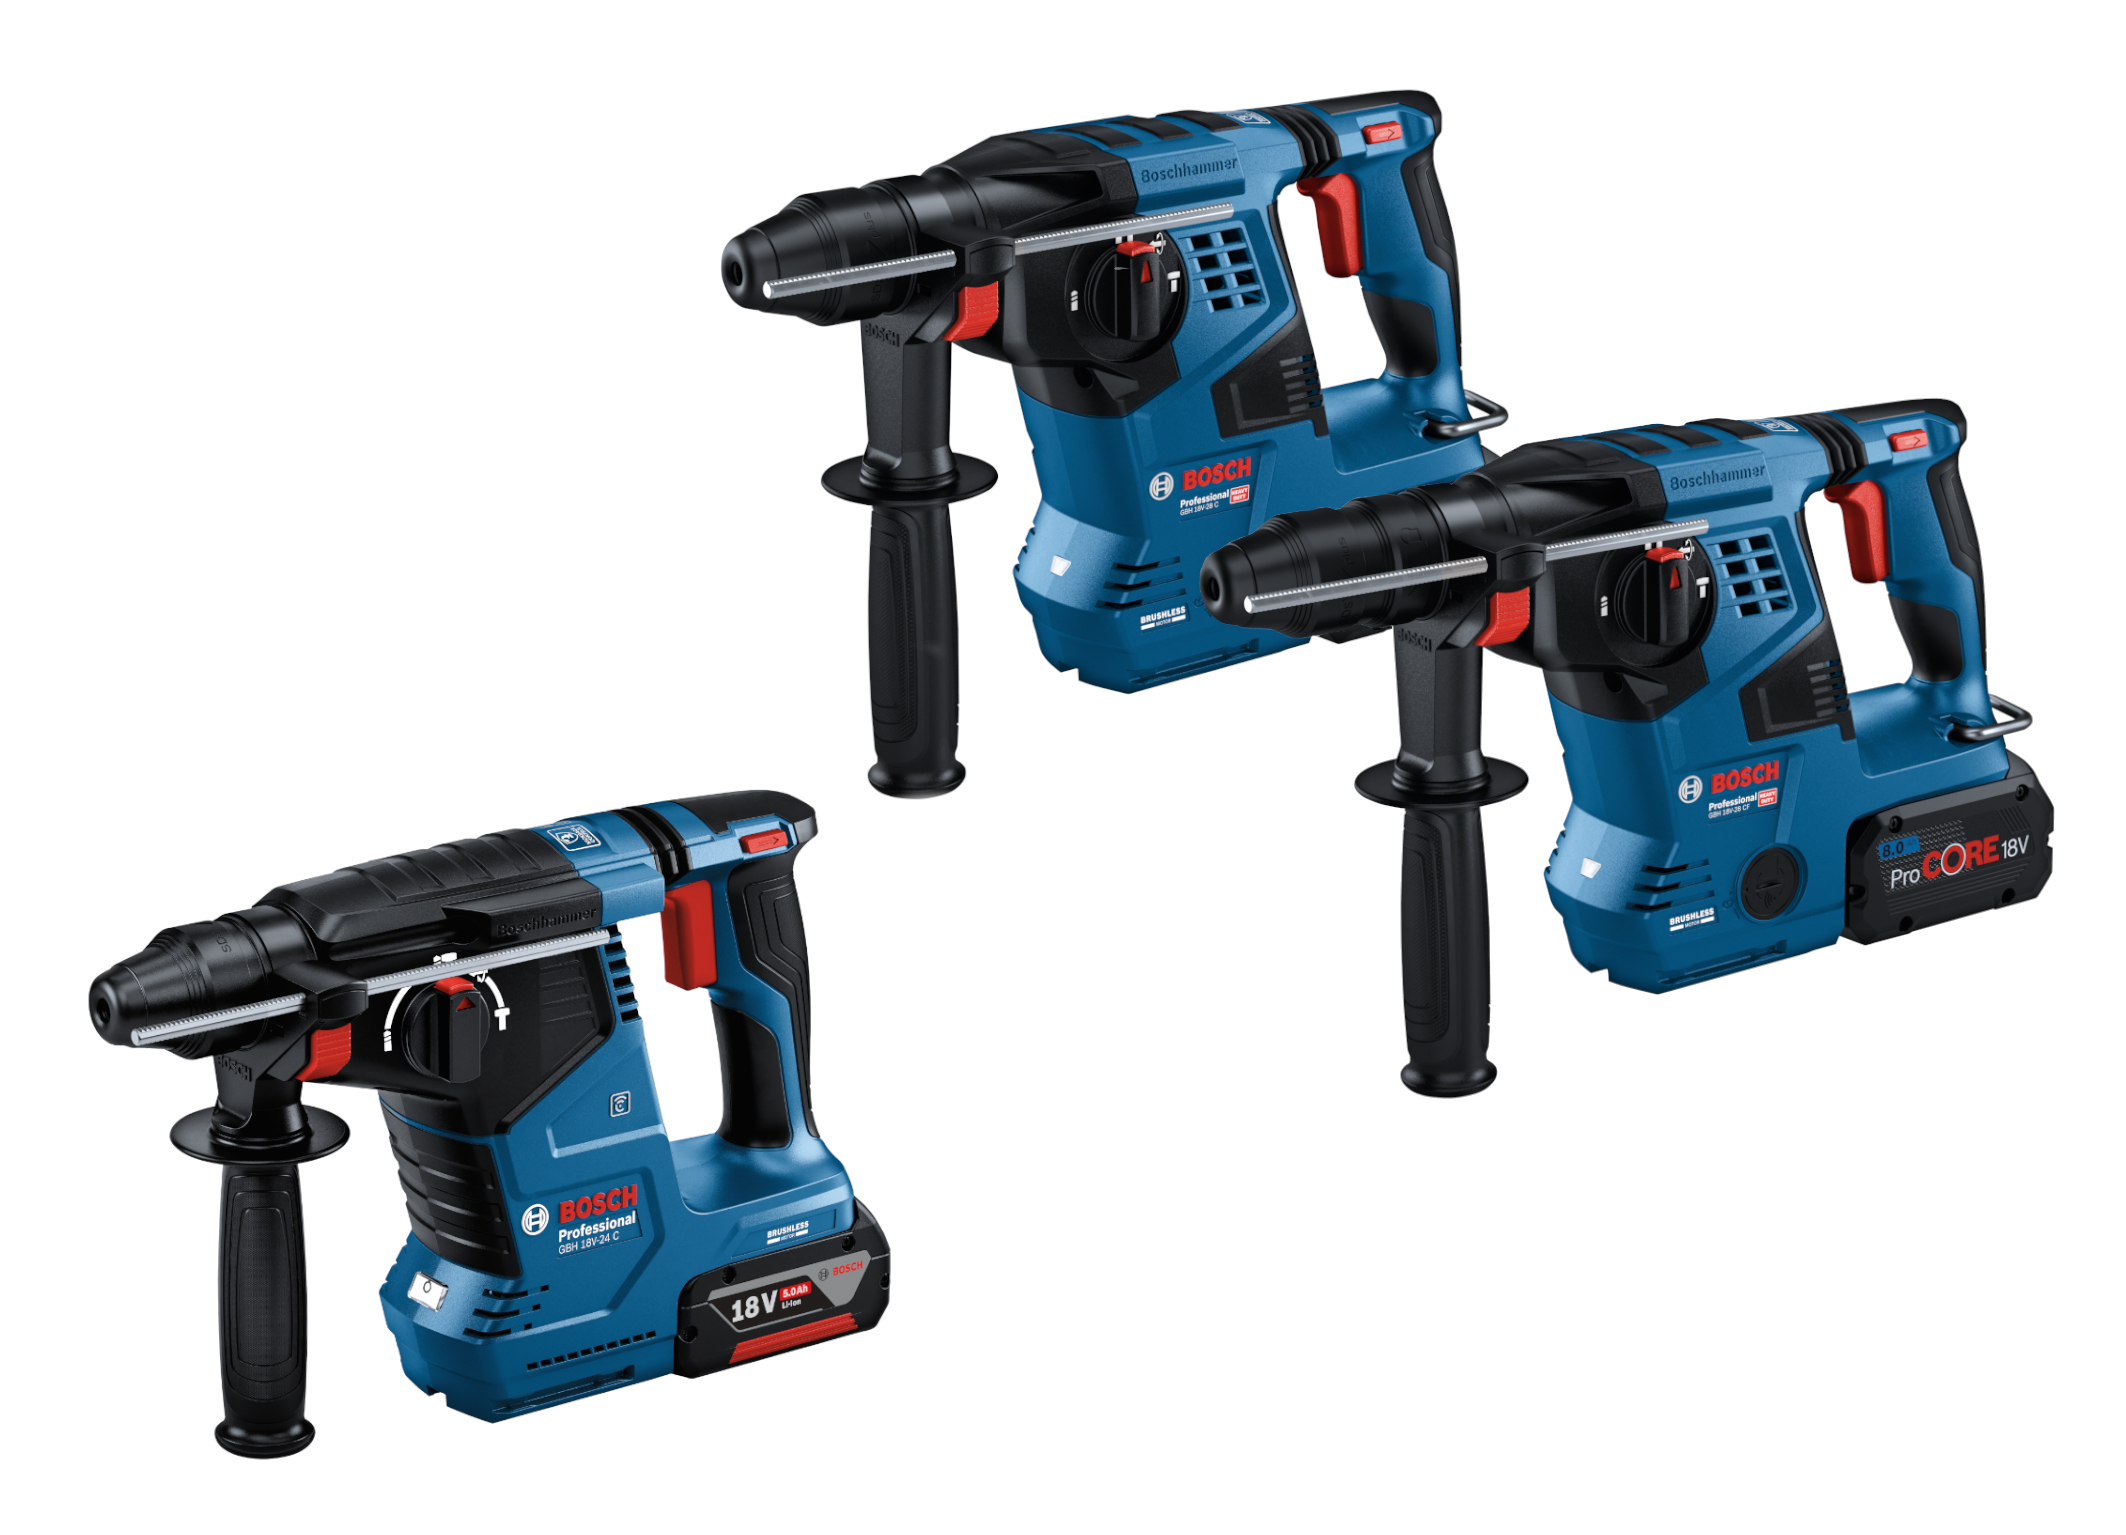 Even larger portfolio in the Professional 18V System: Versatile professional rotary hammers from Bosch